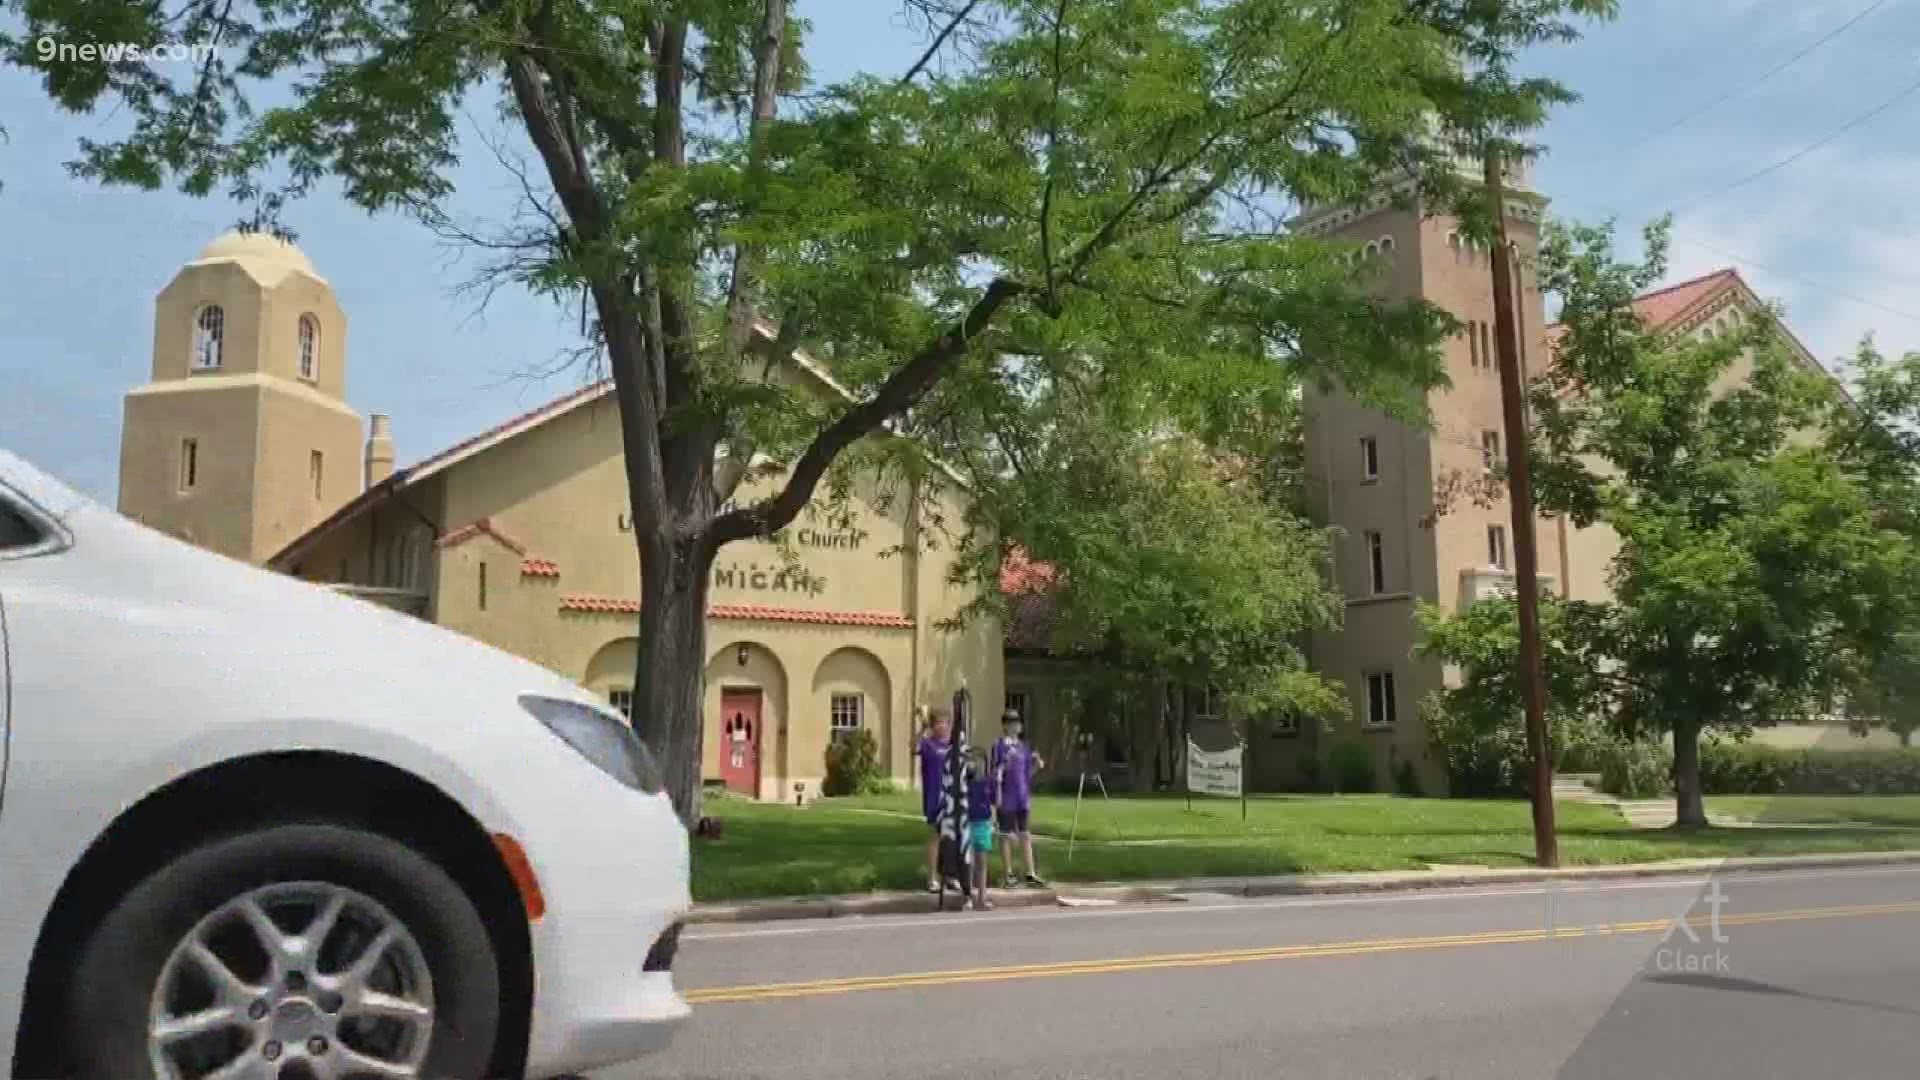 Some church bells rang at noon across Denver on Wednesday for eight minutes and 46 seconds. That will continue through Juneteenth on Friday.